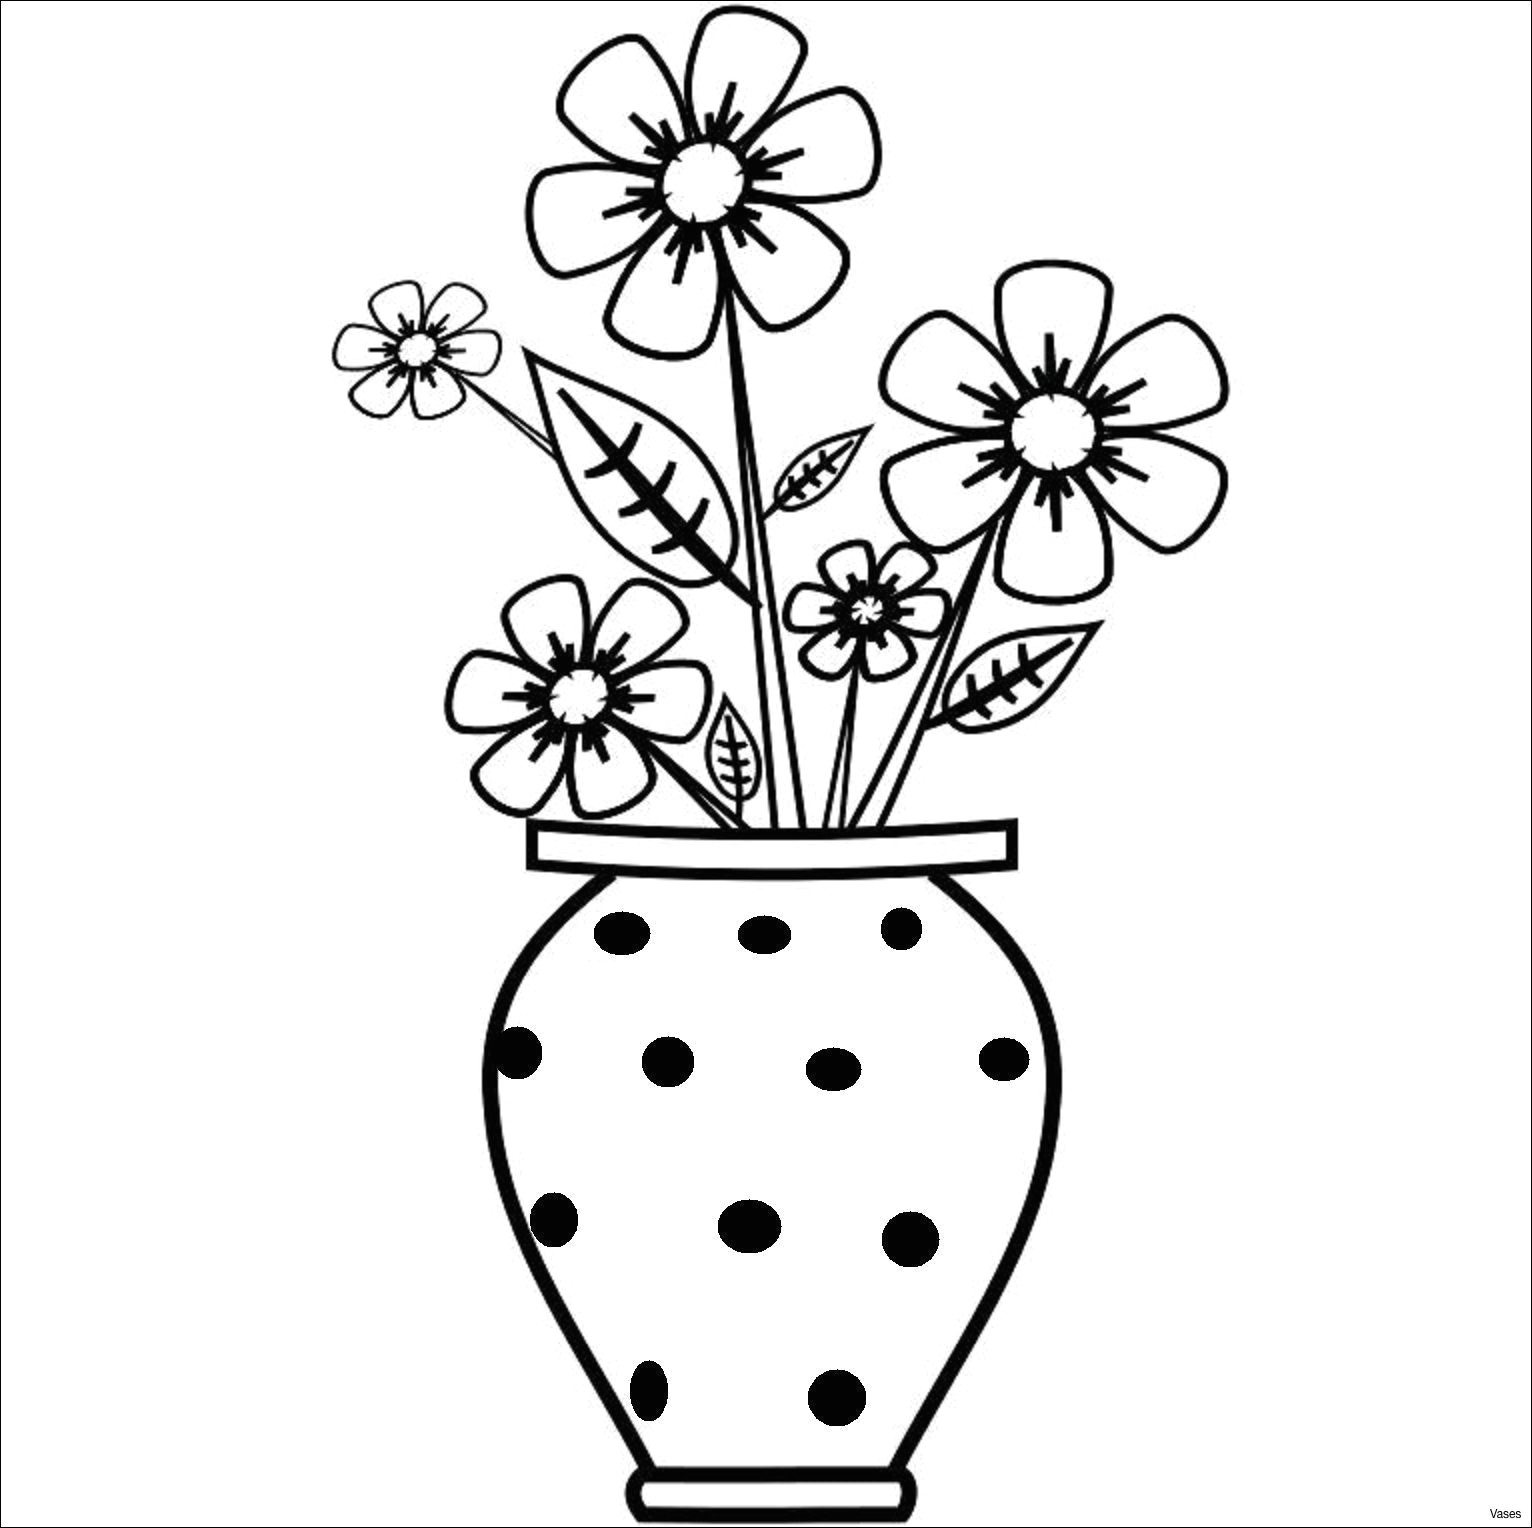 Easy Drawings Of Flower Pot Images Of Easy Drawings Vase Art Drawings How to Draw A Vase Step 2h